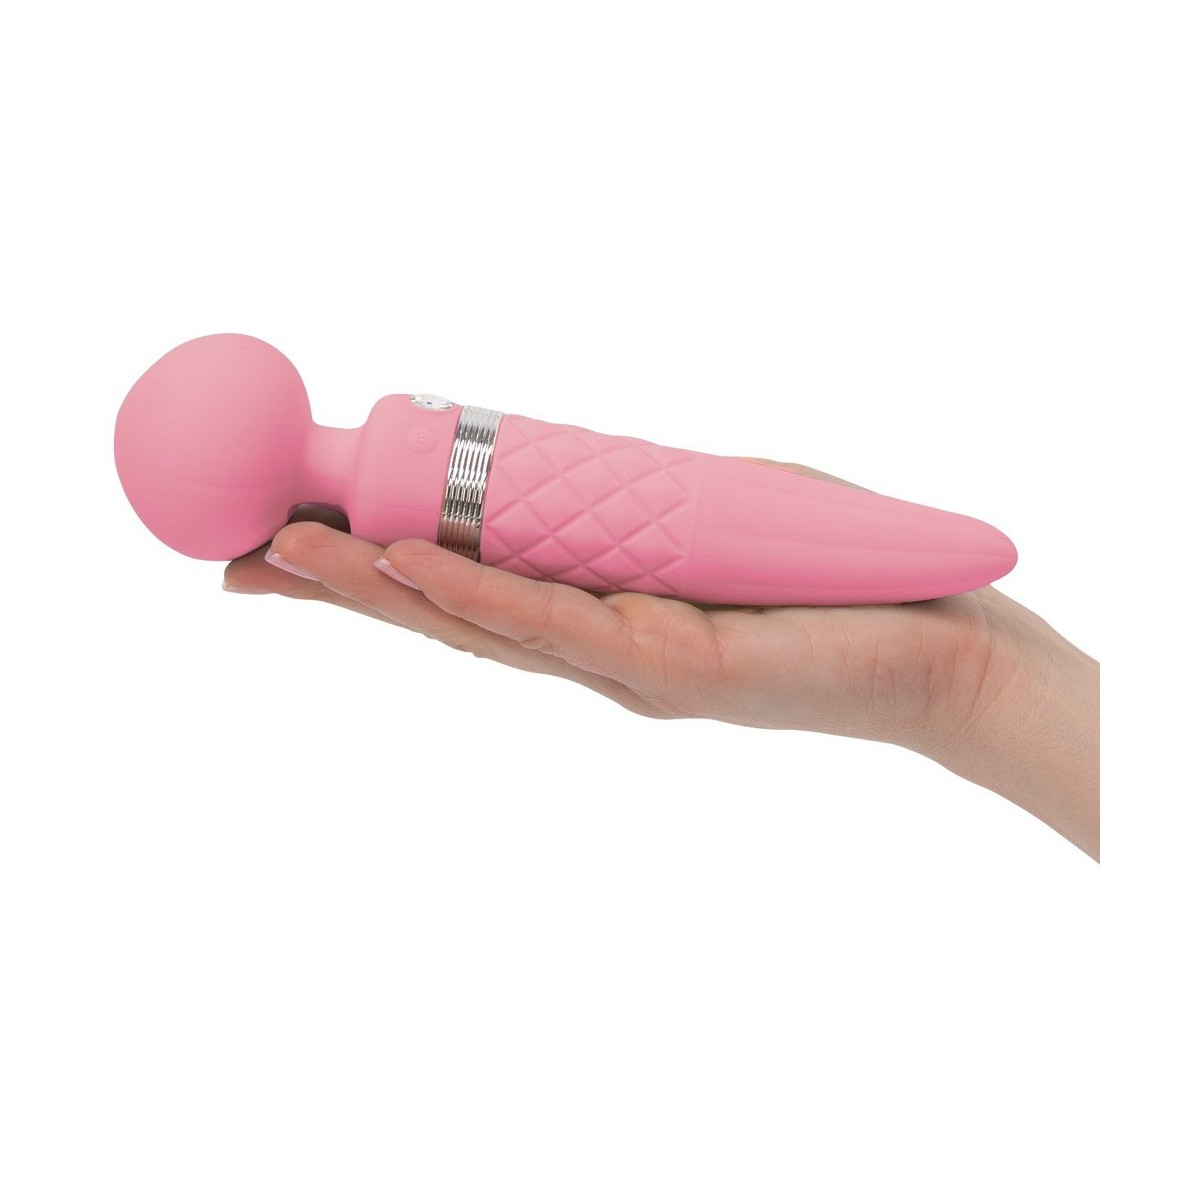 Vibratore wand Pillow Talk Sultry rosa